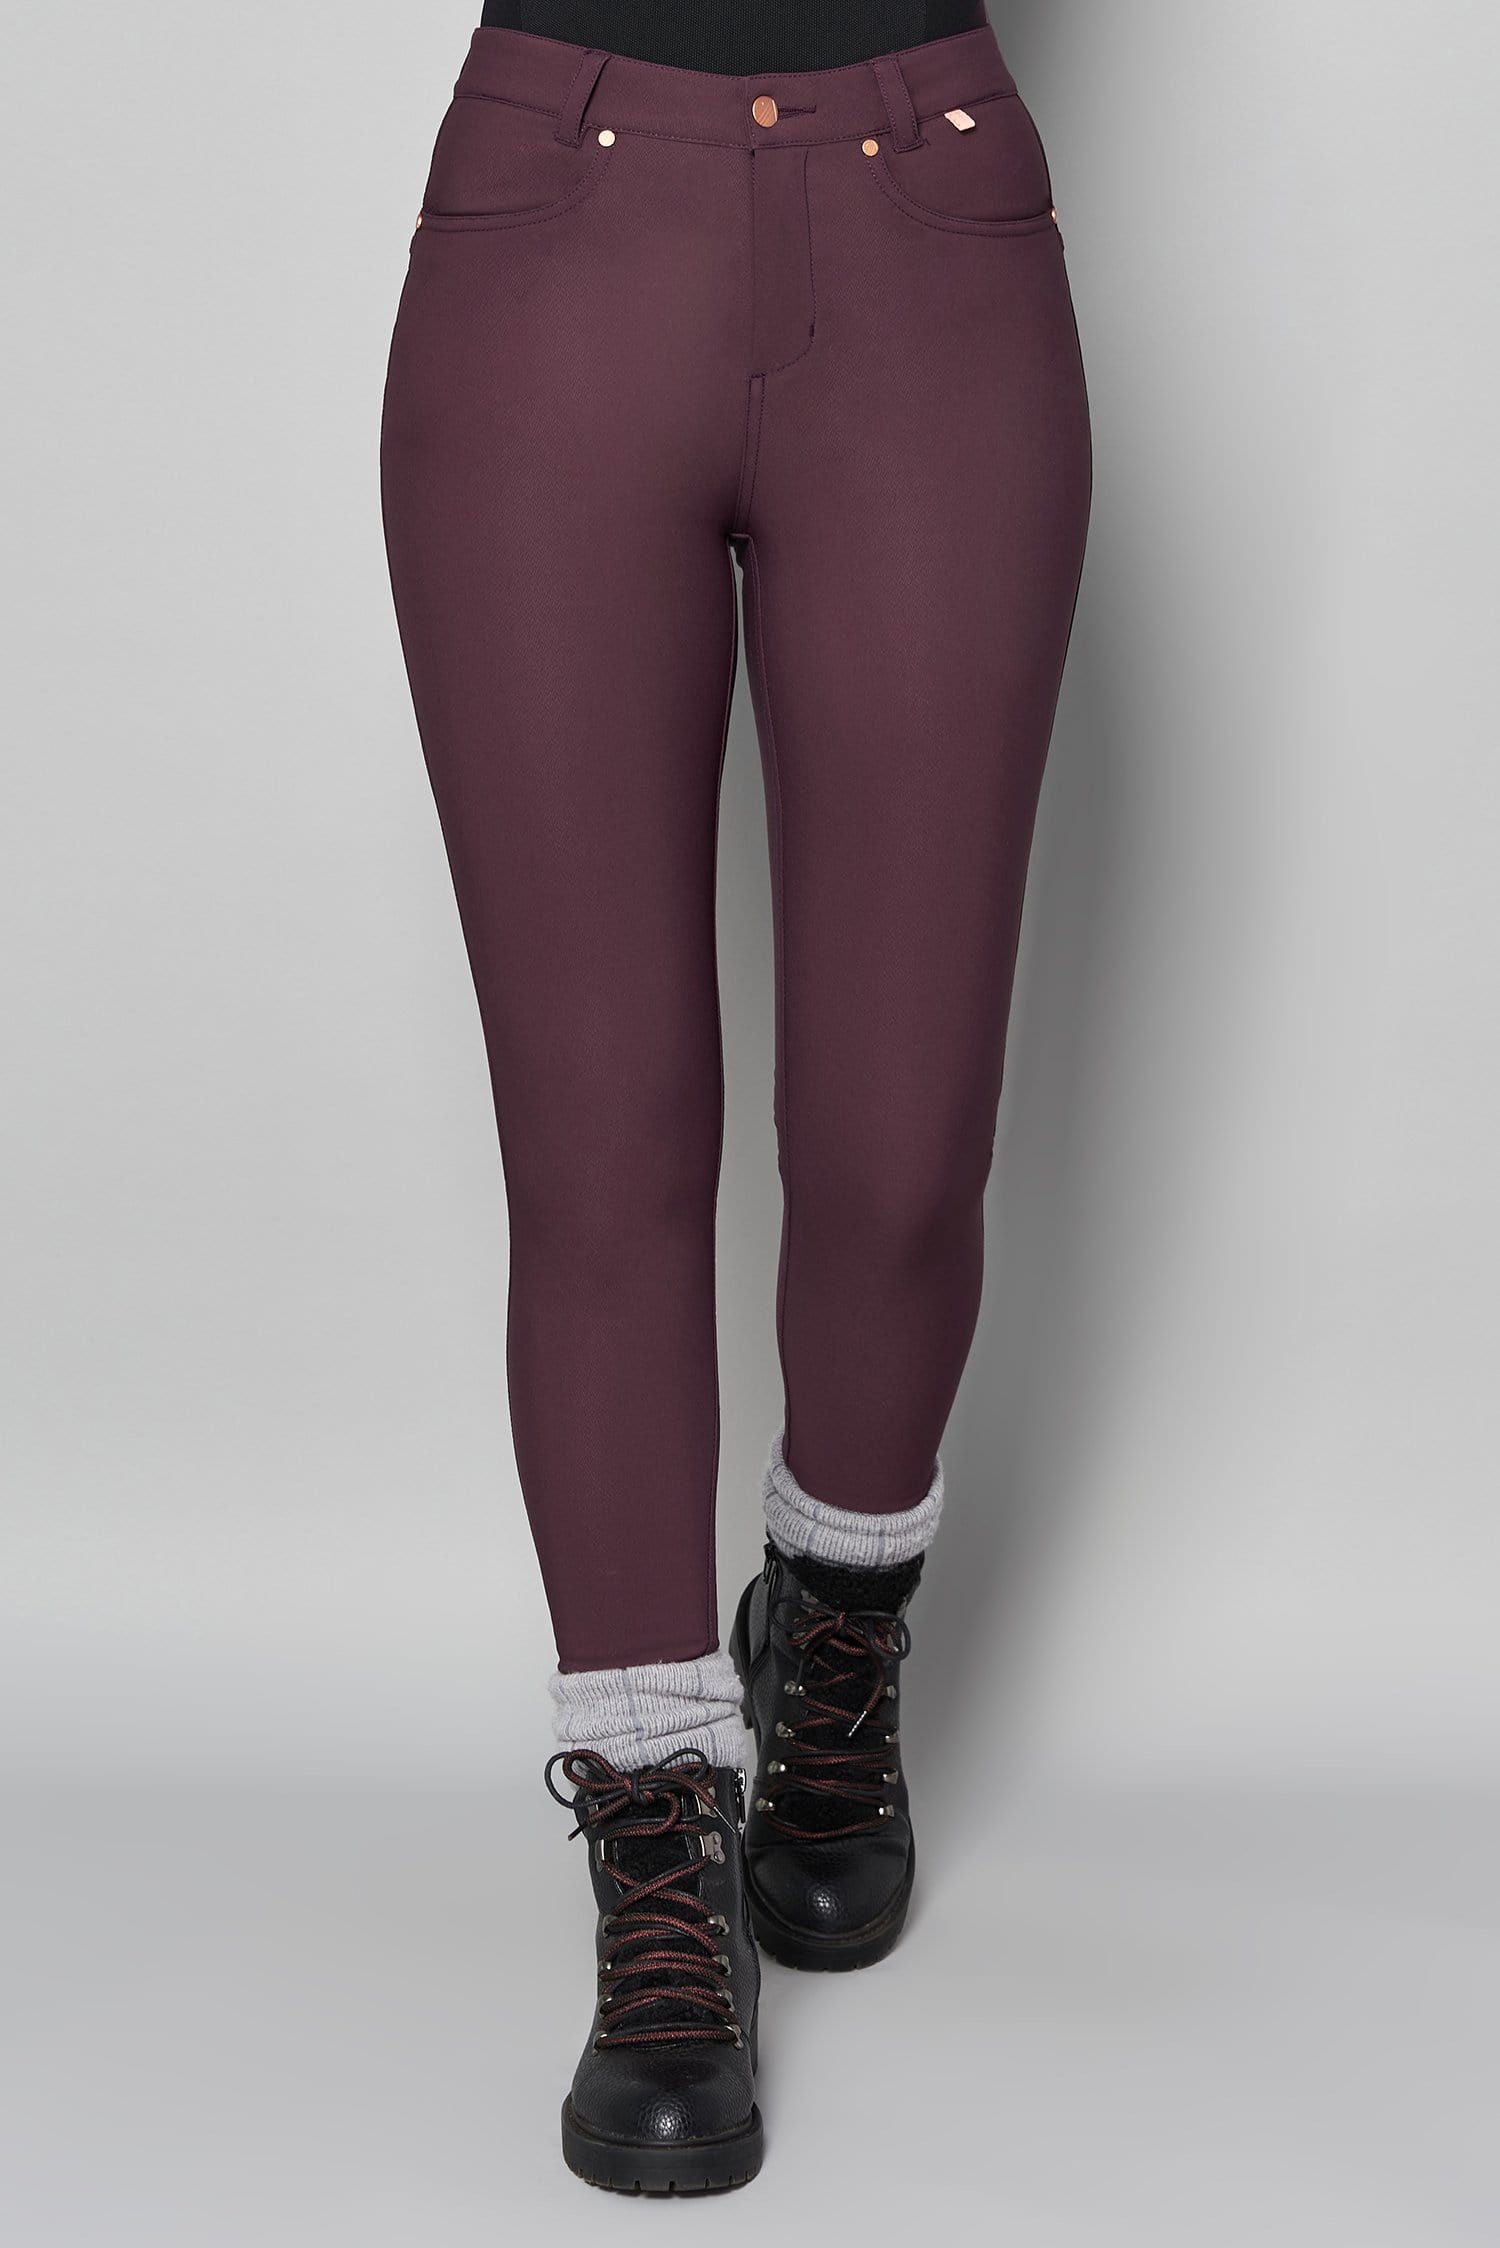 Thermal Skinny Outdoor Trousers - Aubergine - 30p / Uk12 - Womens - Acai Outdoorwear